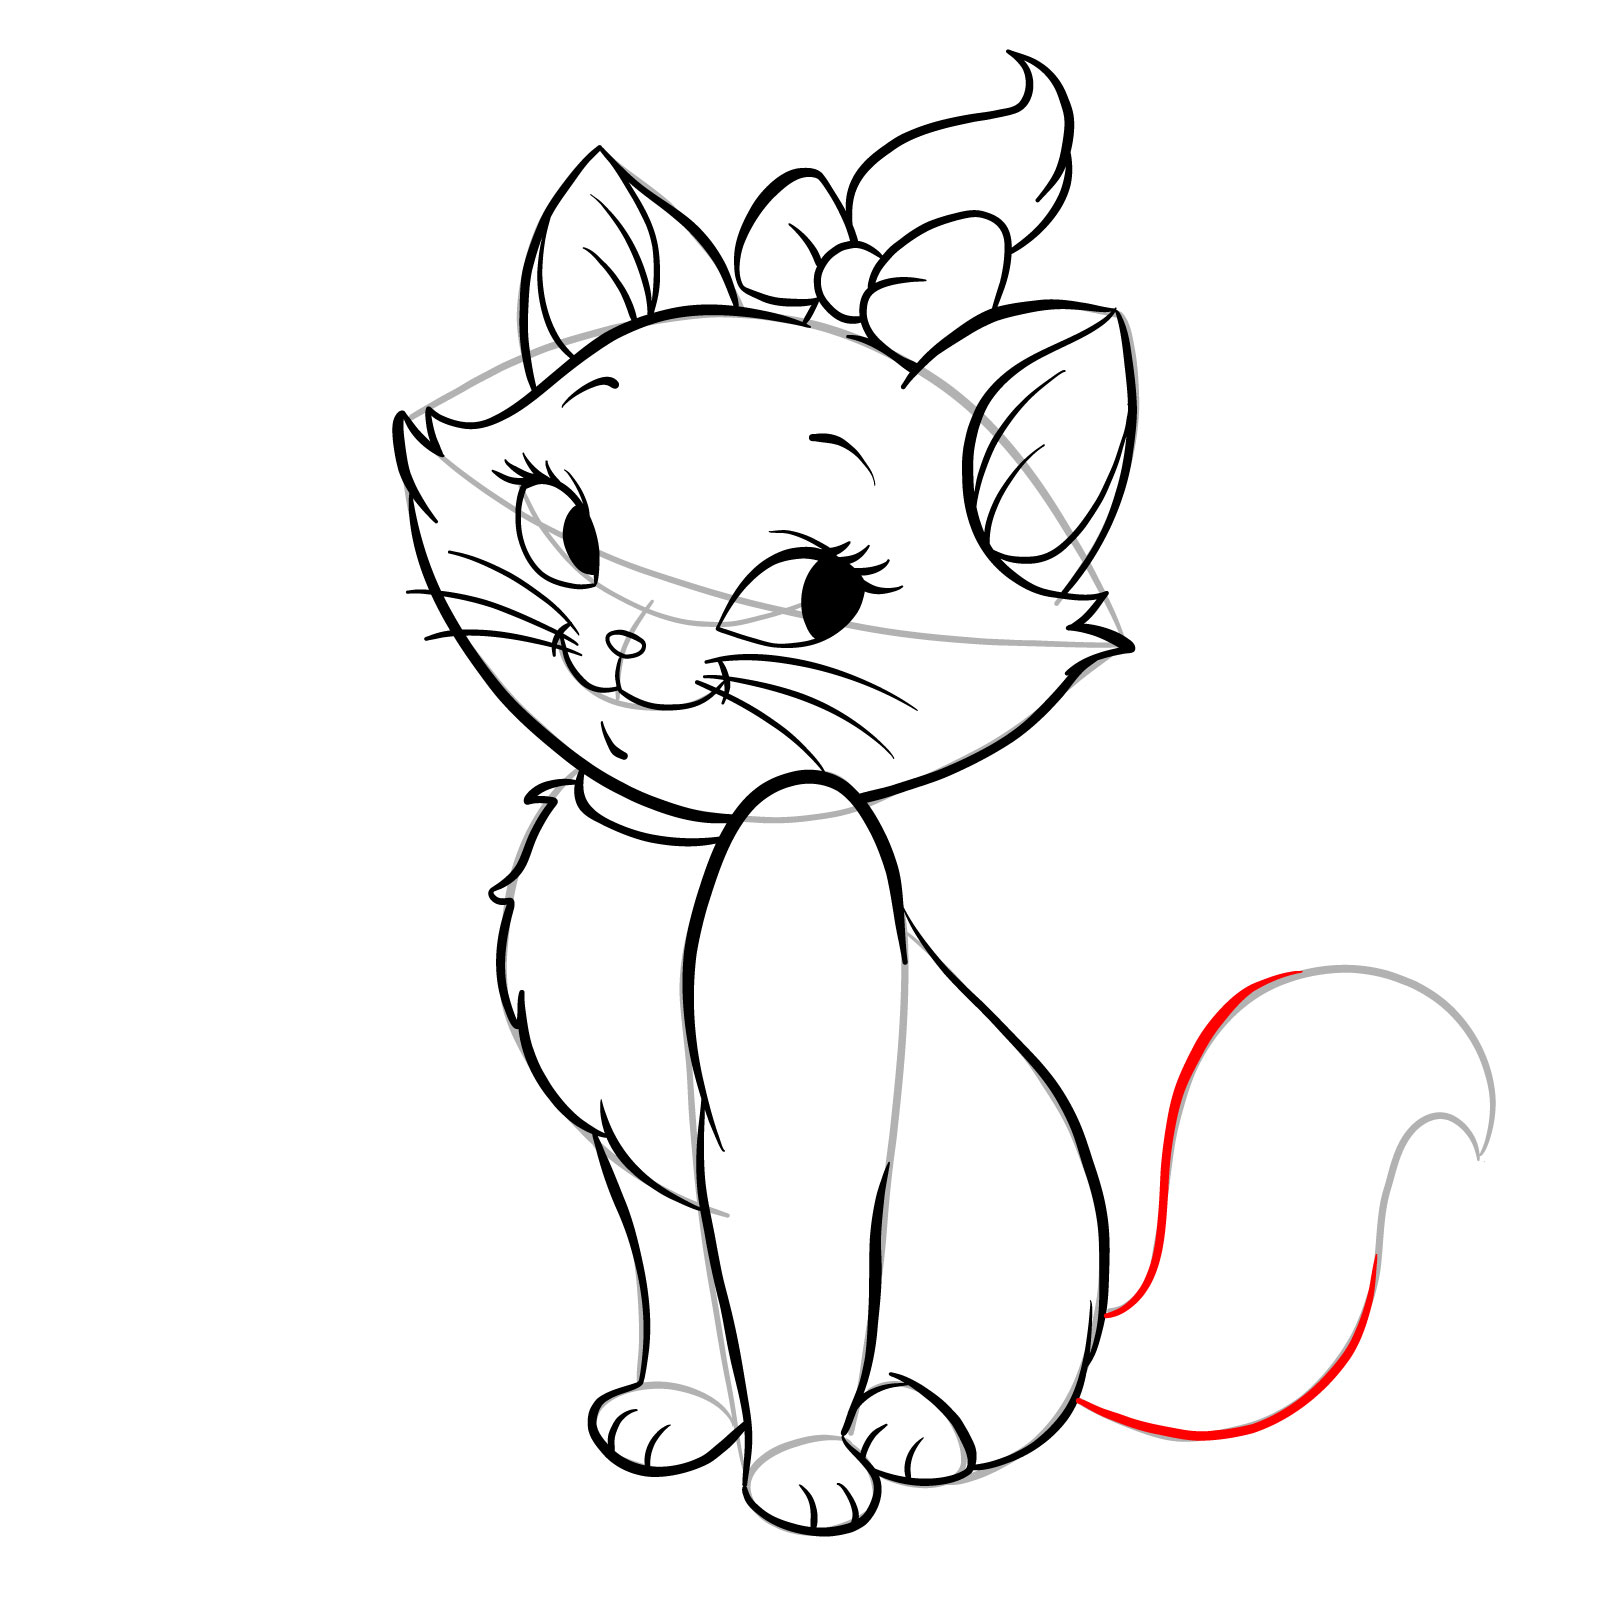 How to draw Marie from The Aristocats - step 23